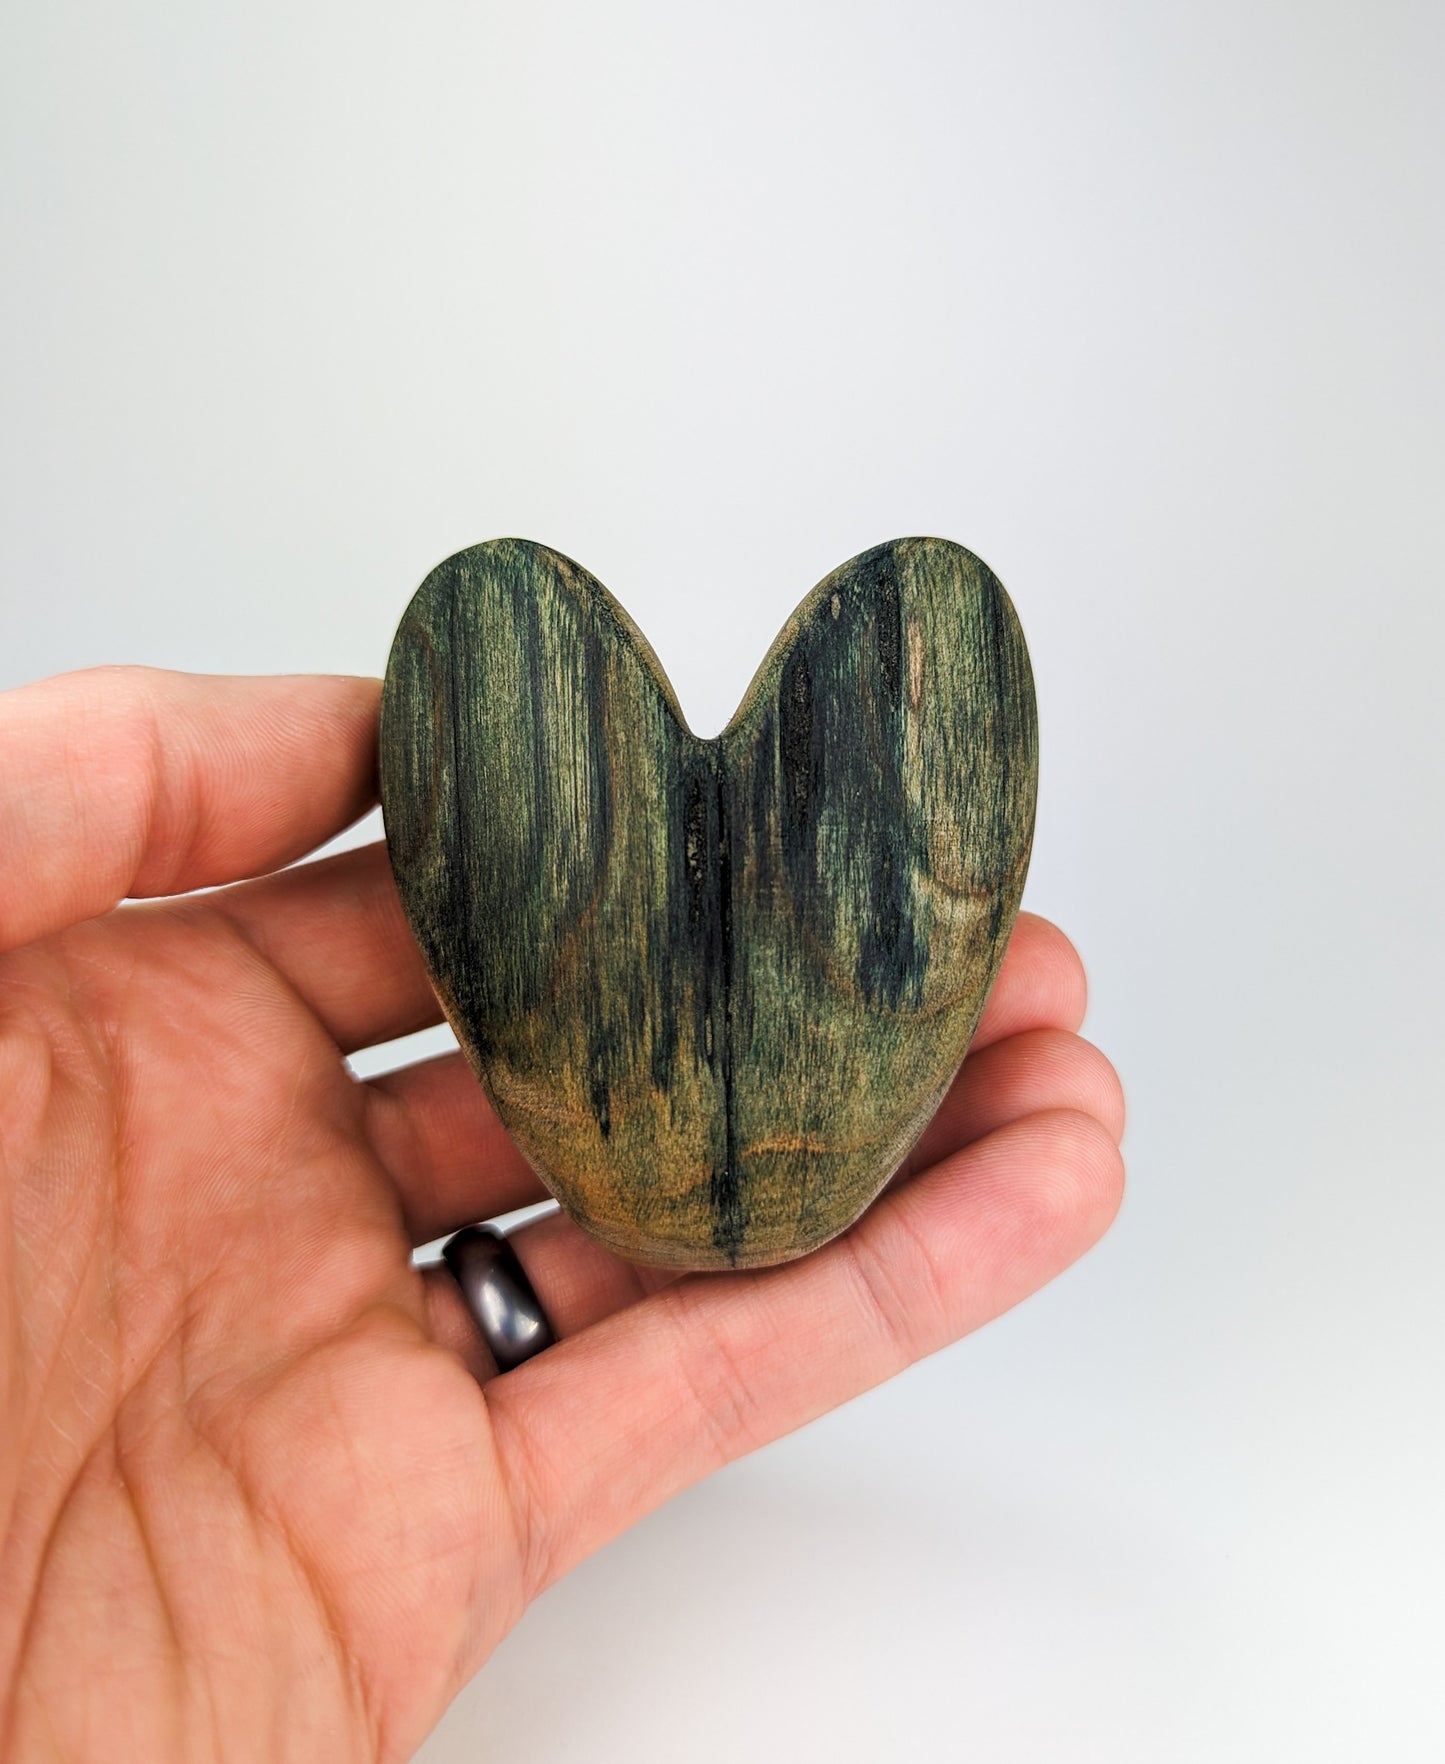 Large Heart | Chlorociboria Creation | Crafted from Mushroom-Colored Wood